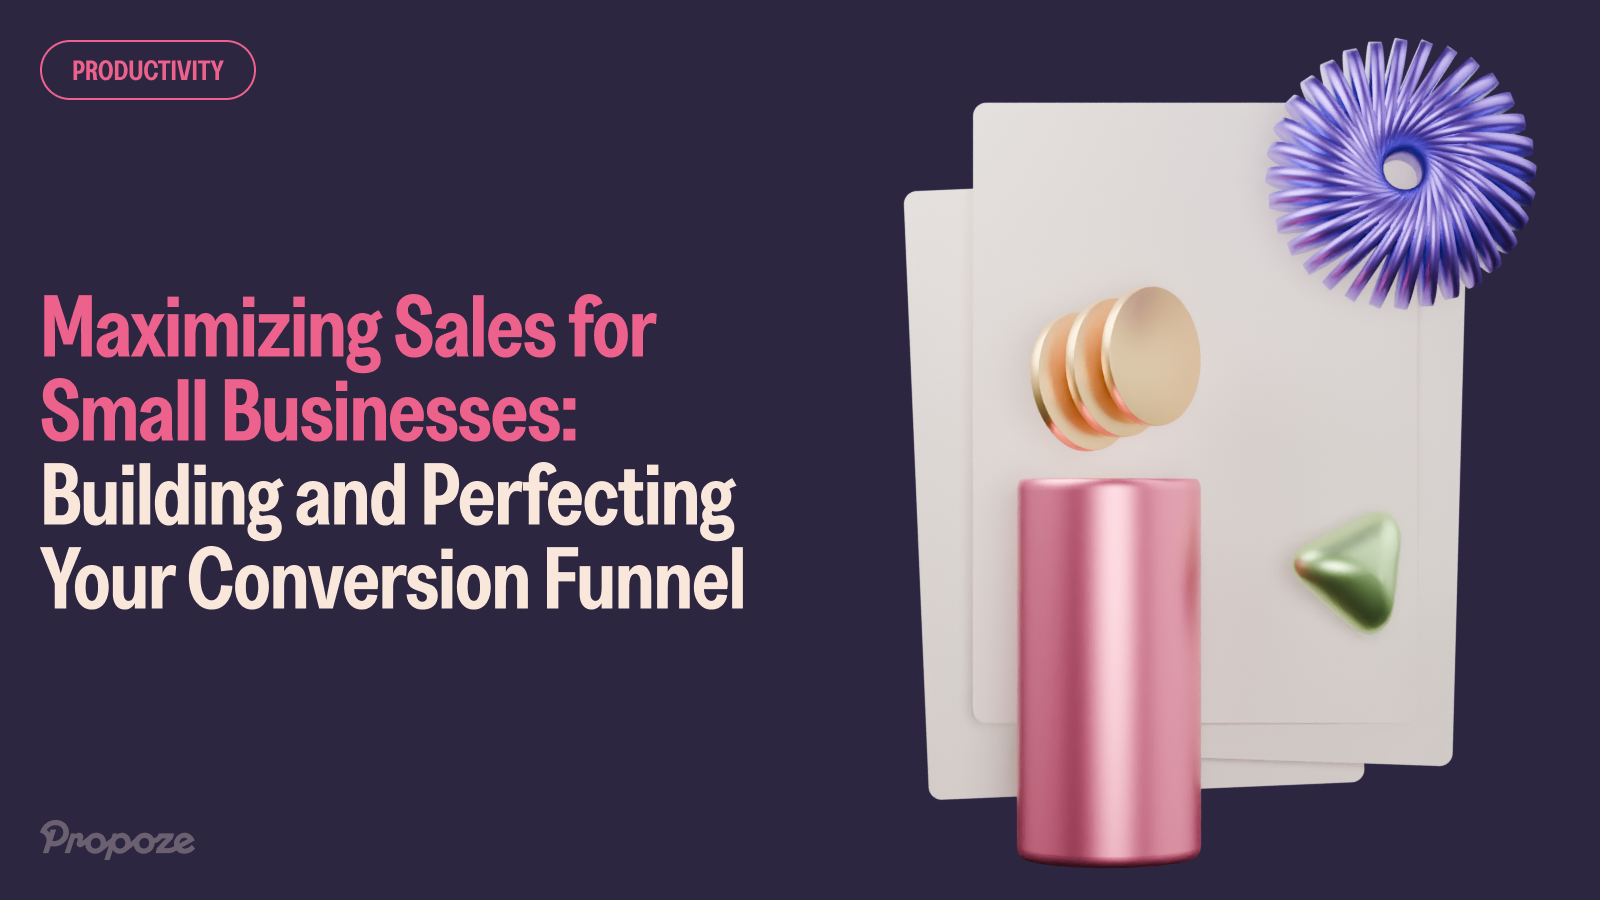 Maximizing Sales for Small Businesses: Building and Perfecting Your Conversion Funnel